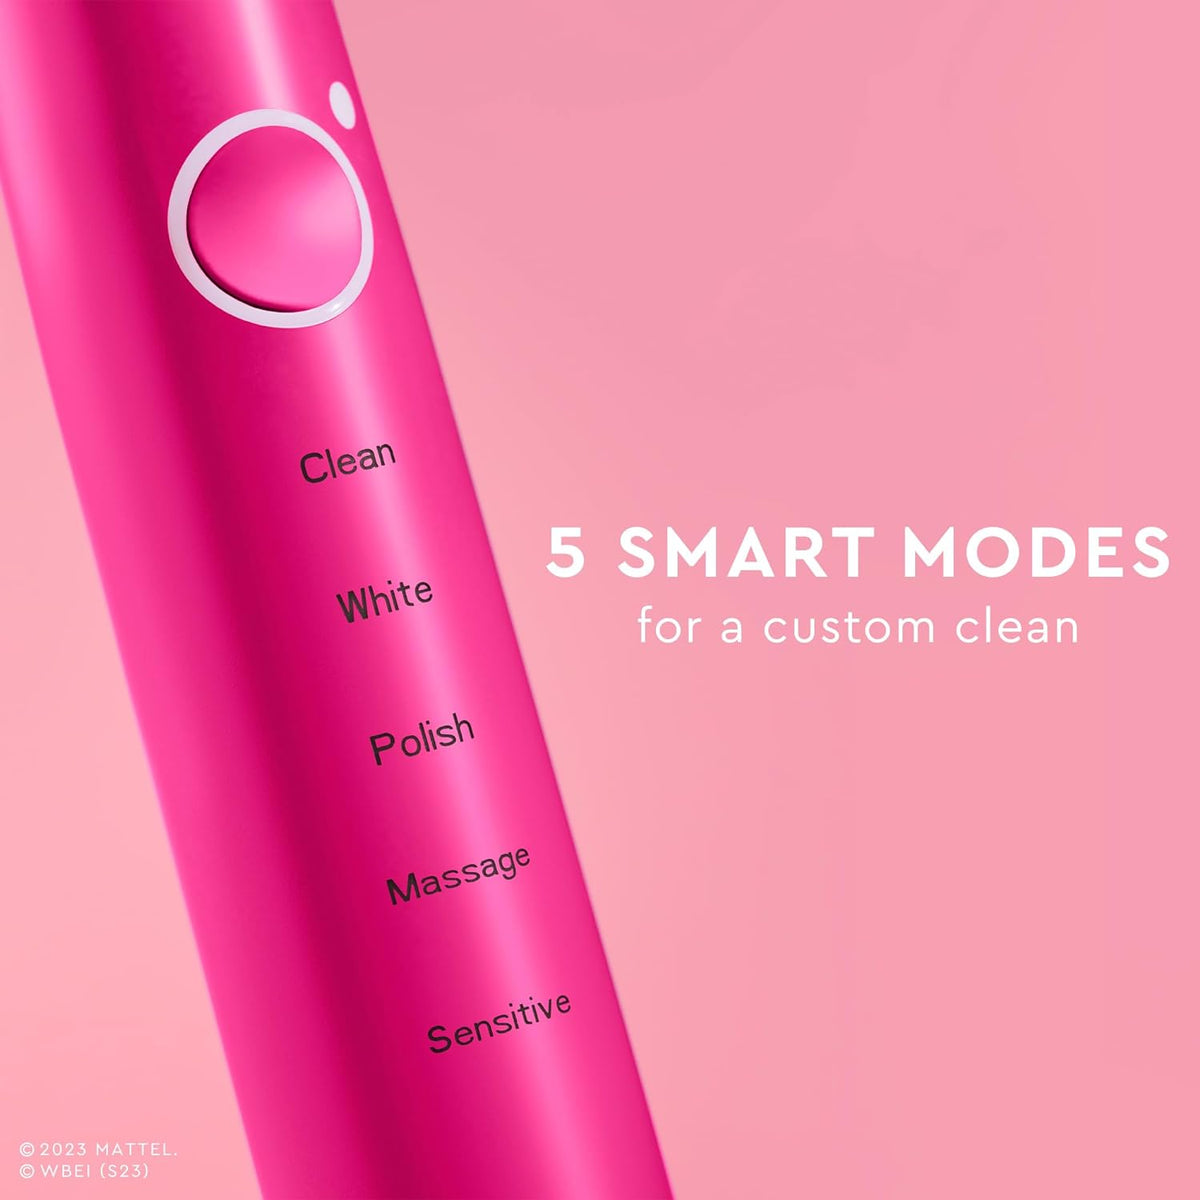 MOON - Barbie The Movie x Pink Sonic Electric Toothbrush